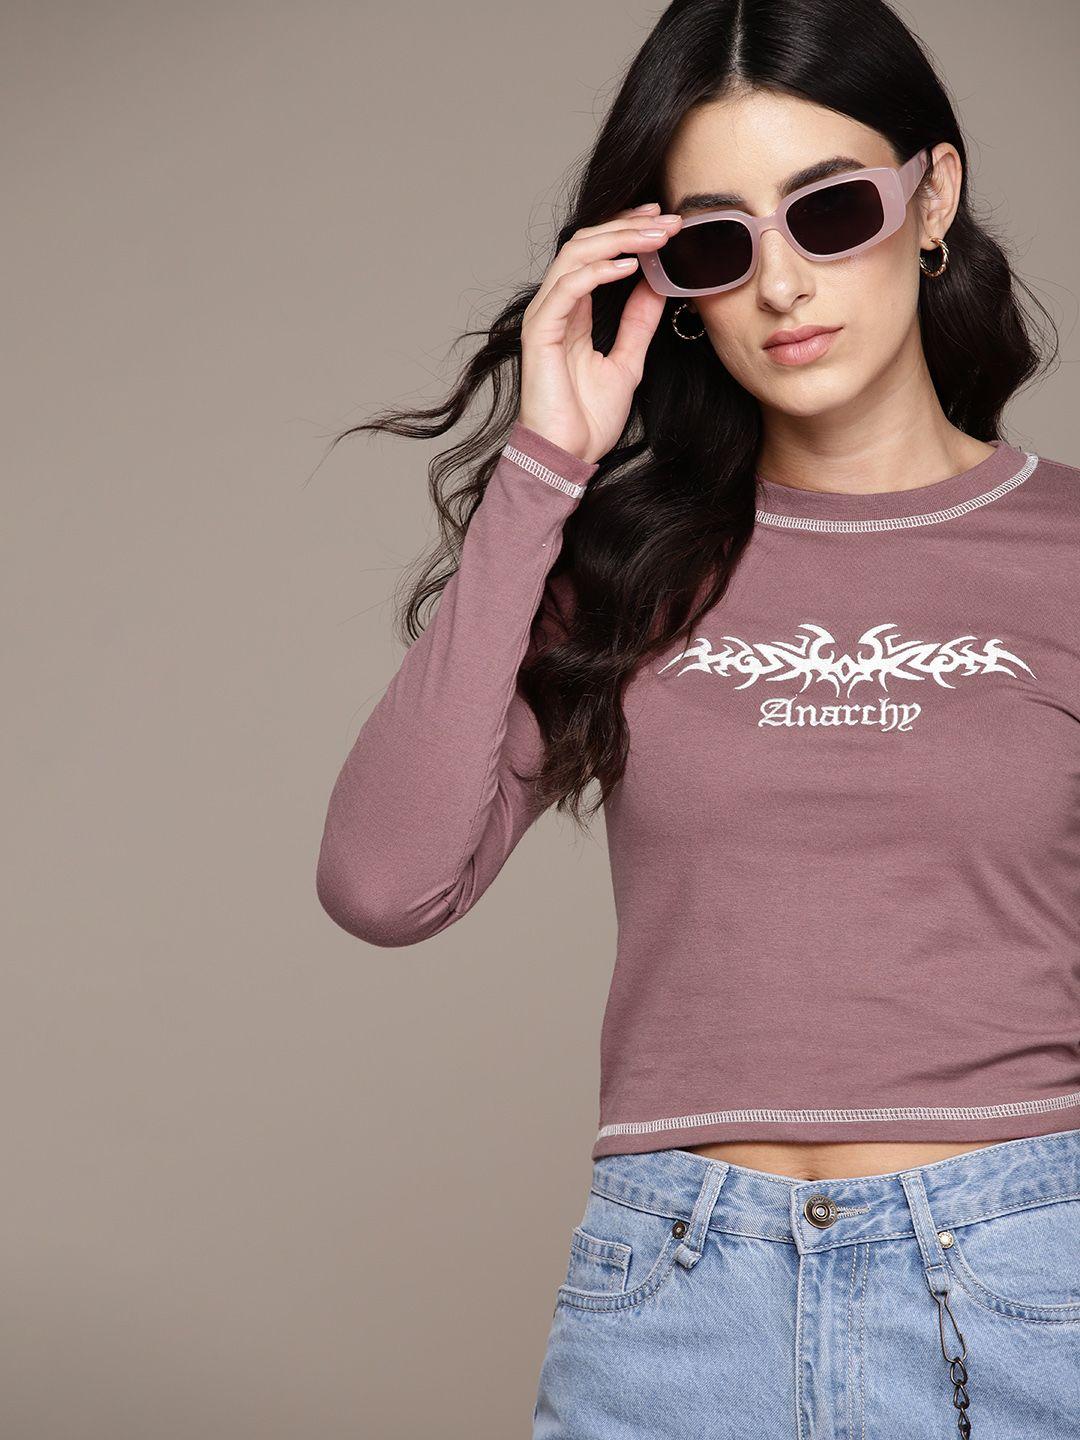 the roadster lifestyle co. embroidered t-shirt